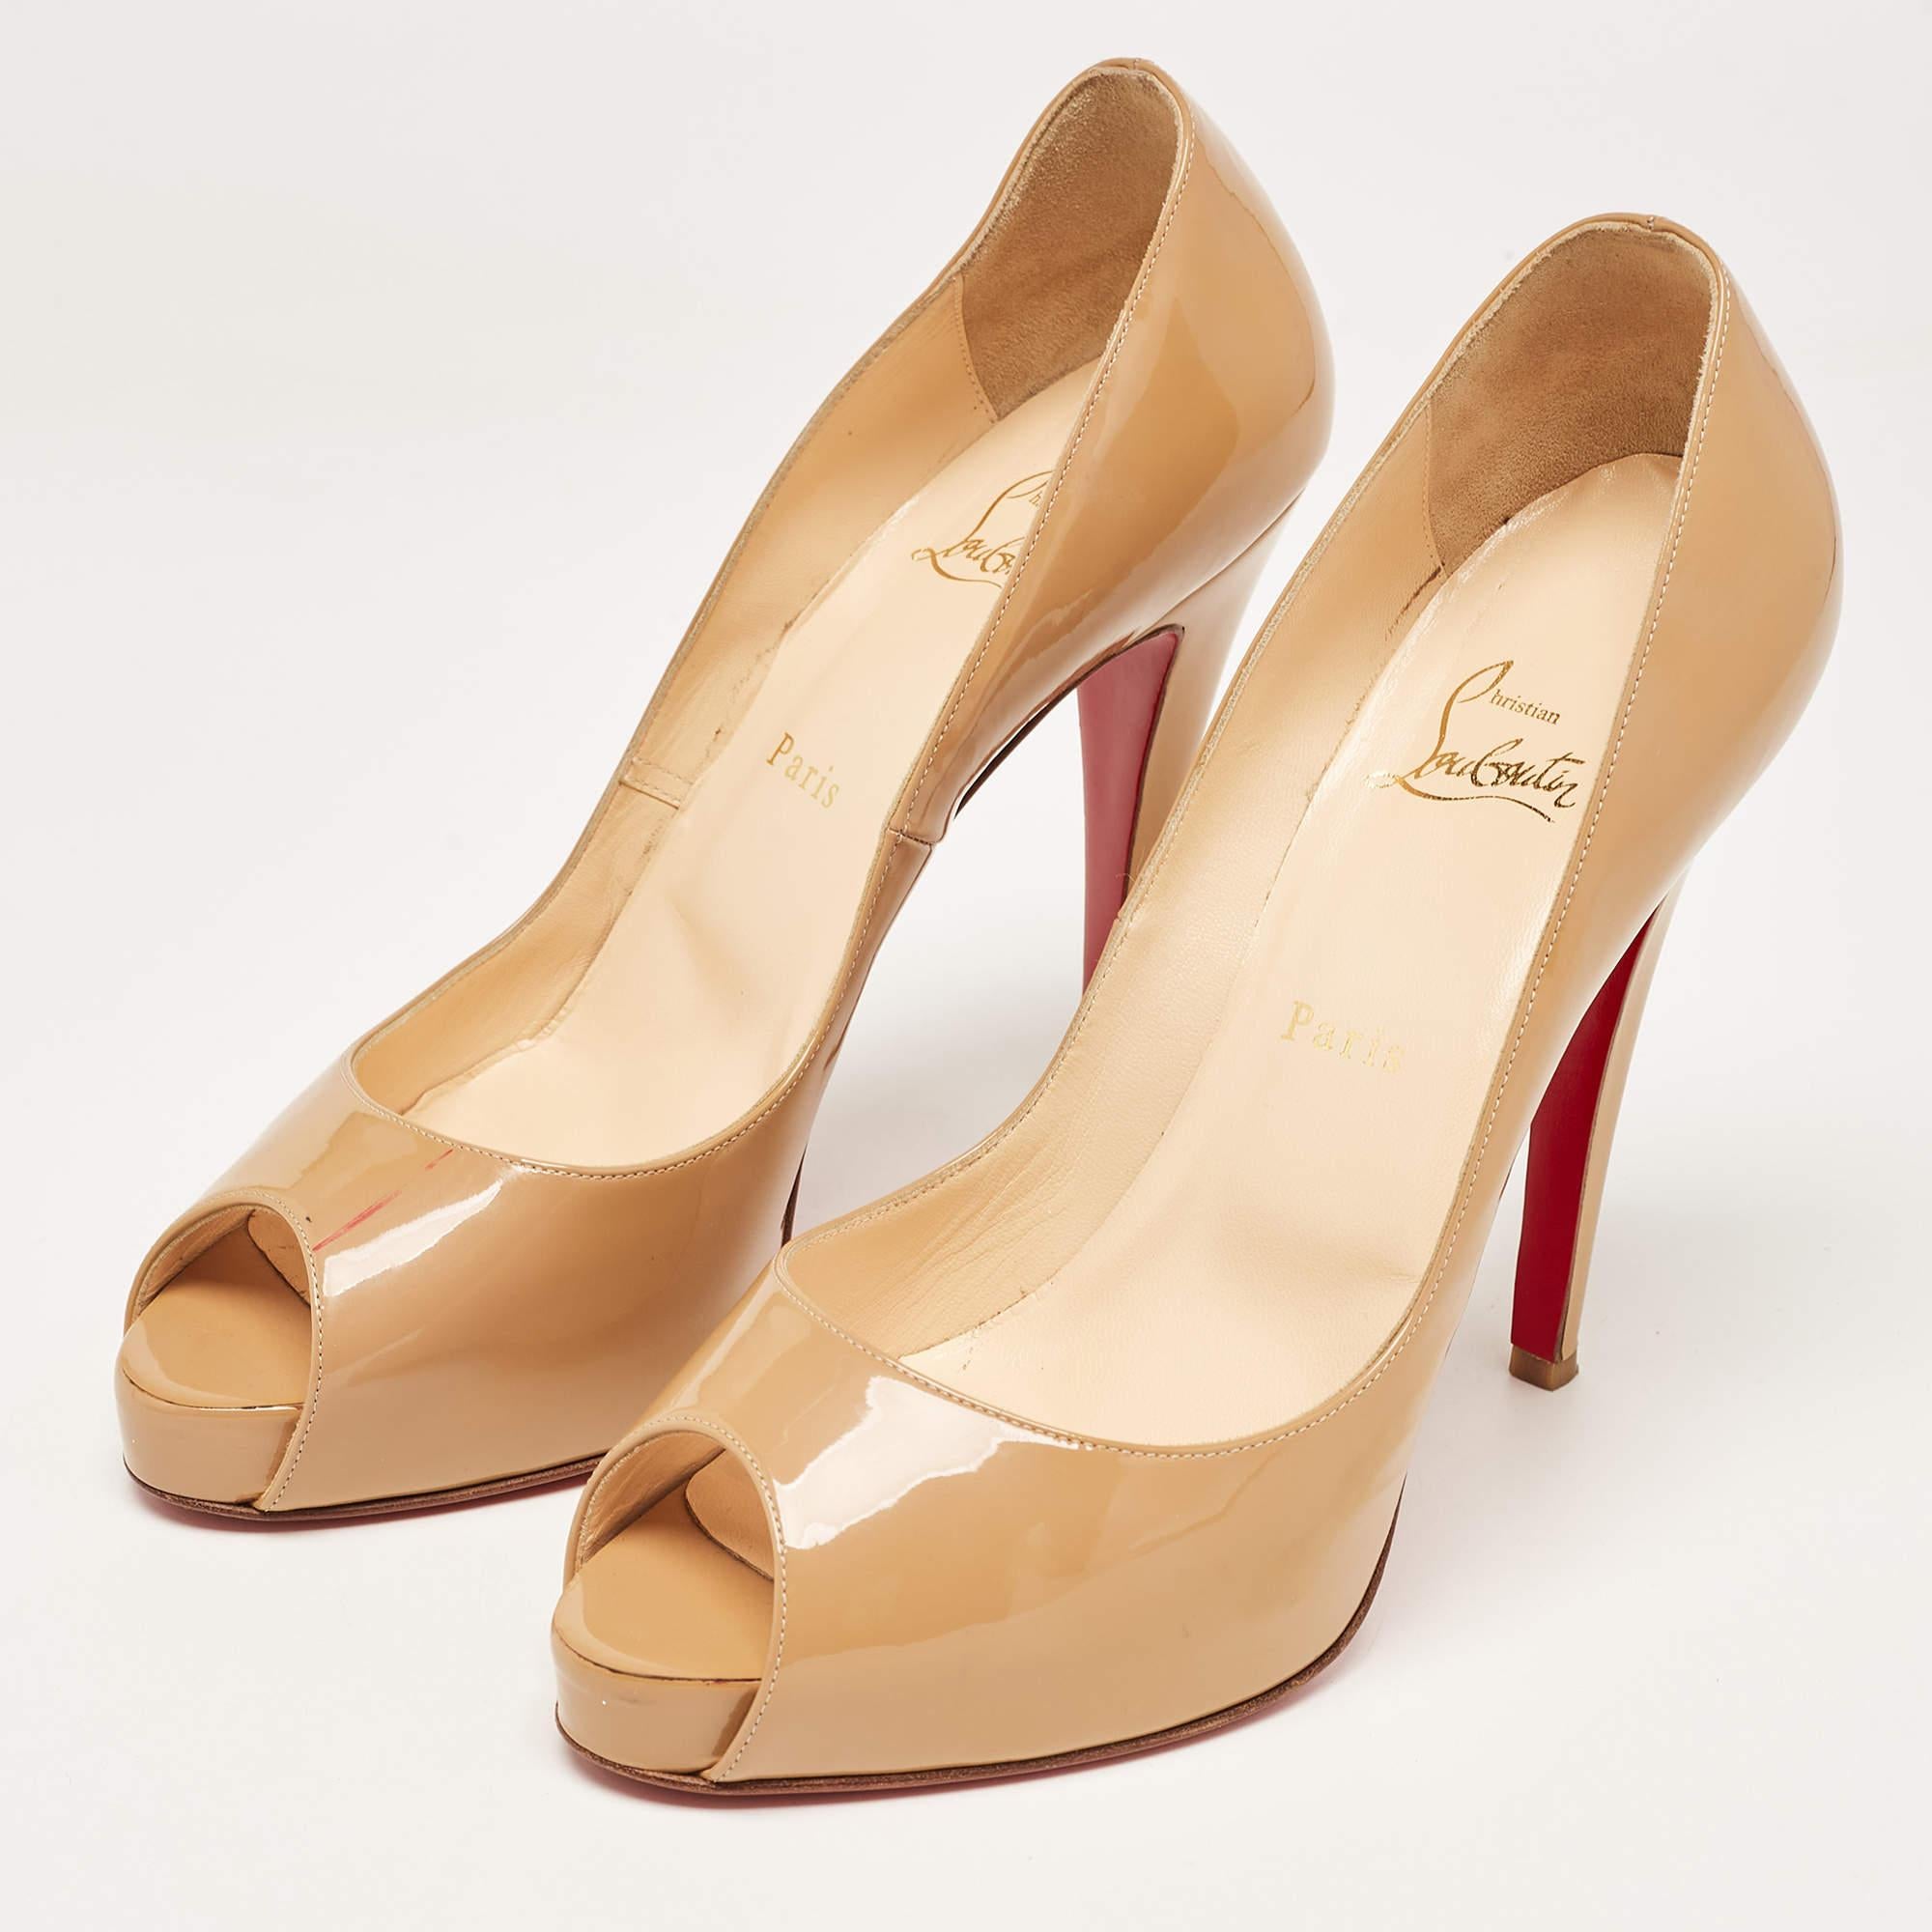 Christian Louboutin Beige Patent Leather Very Prive Pumps Size 41 For Sale 1